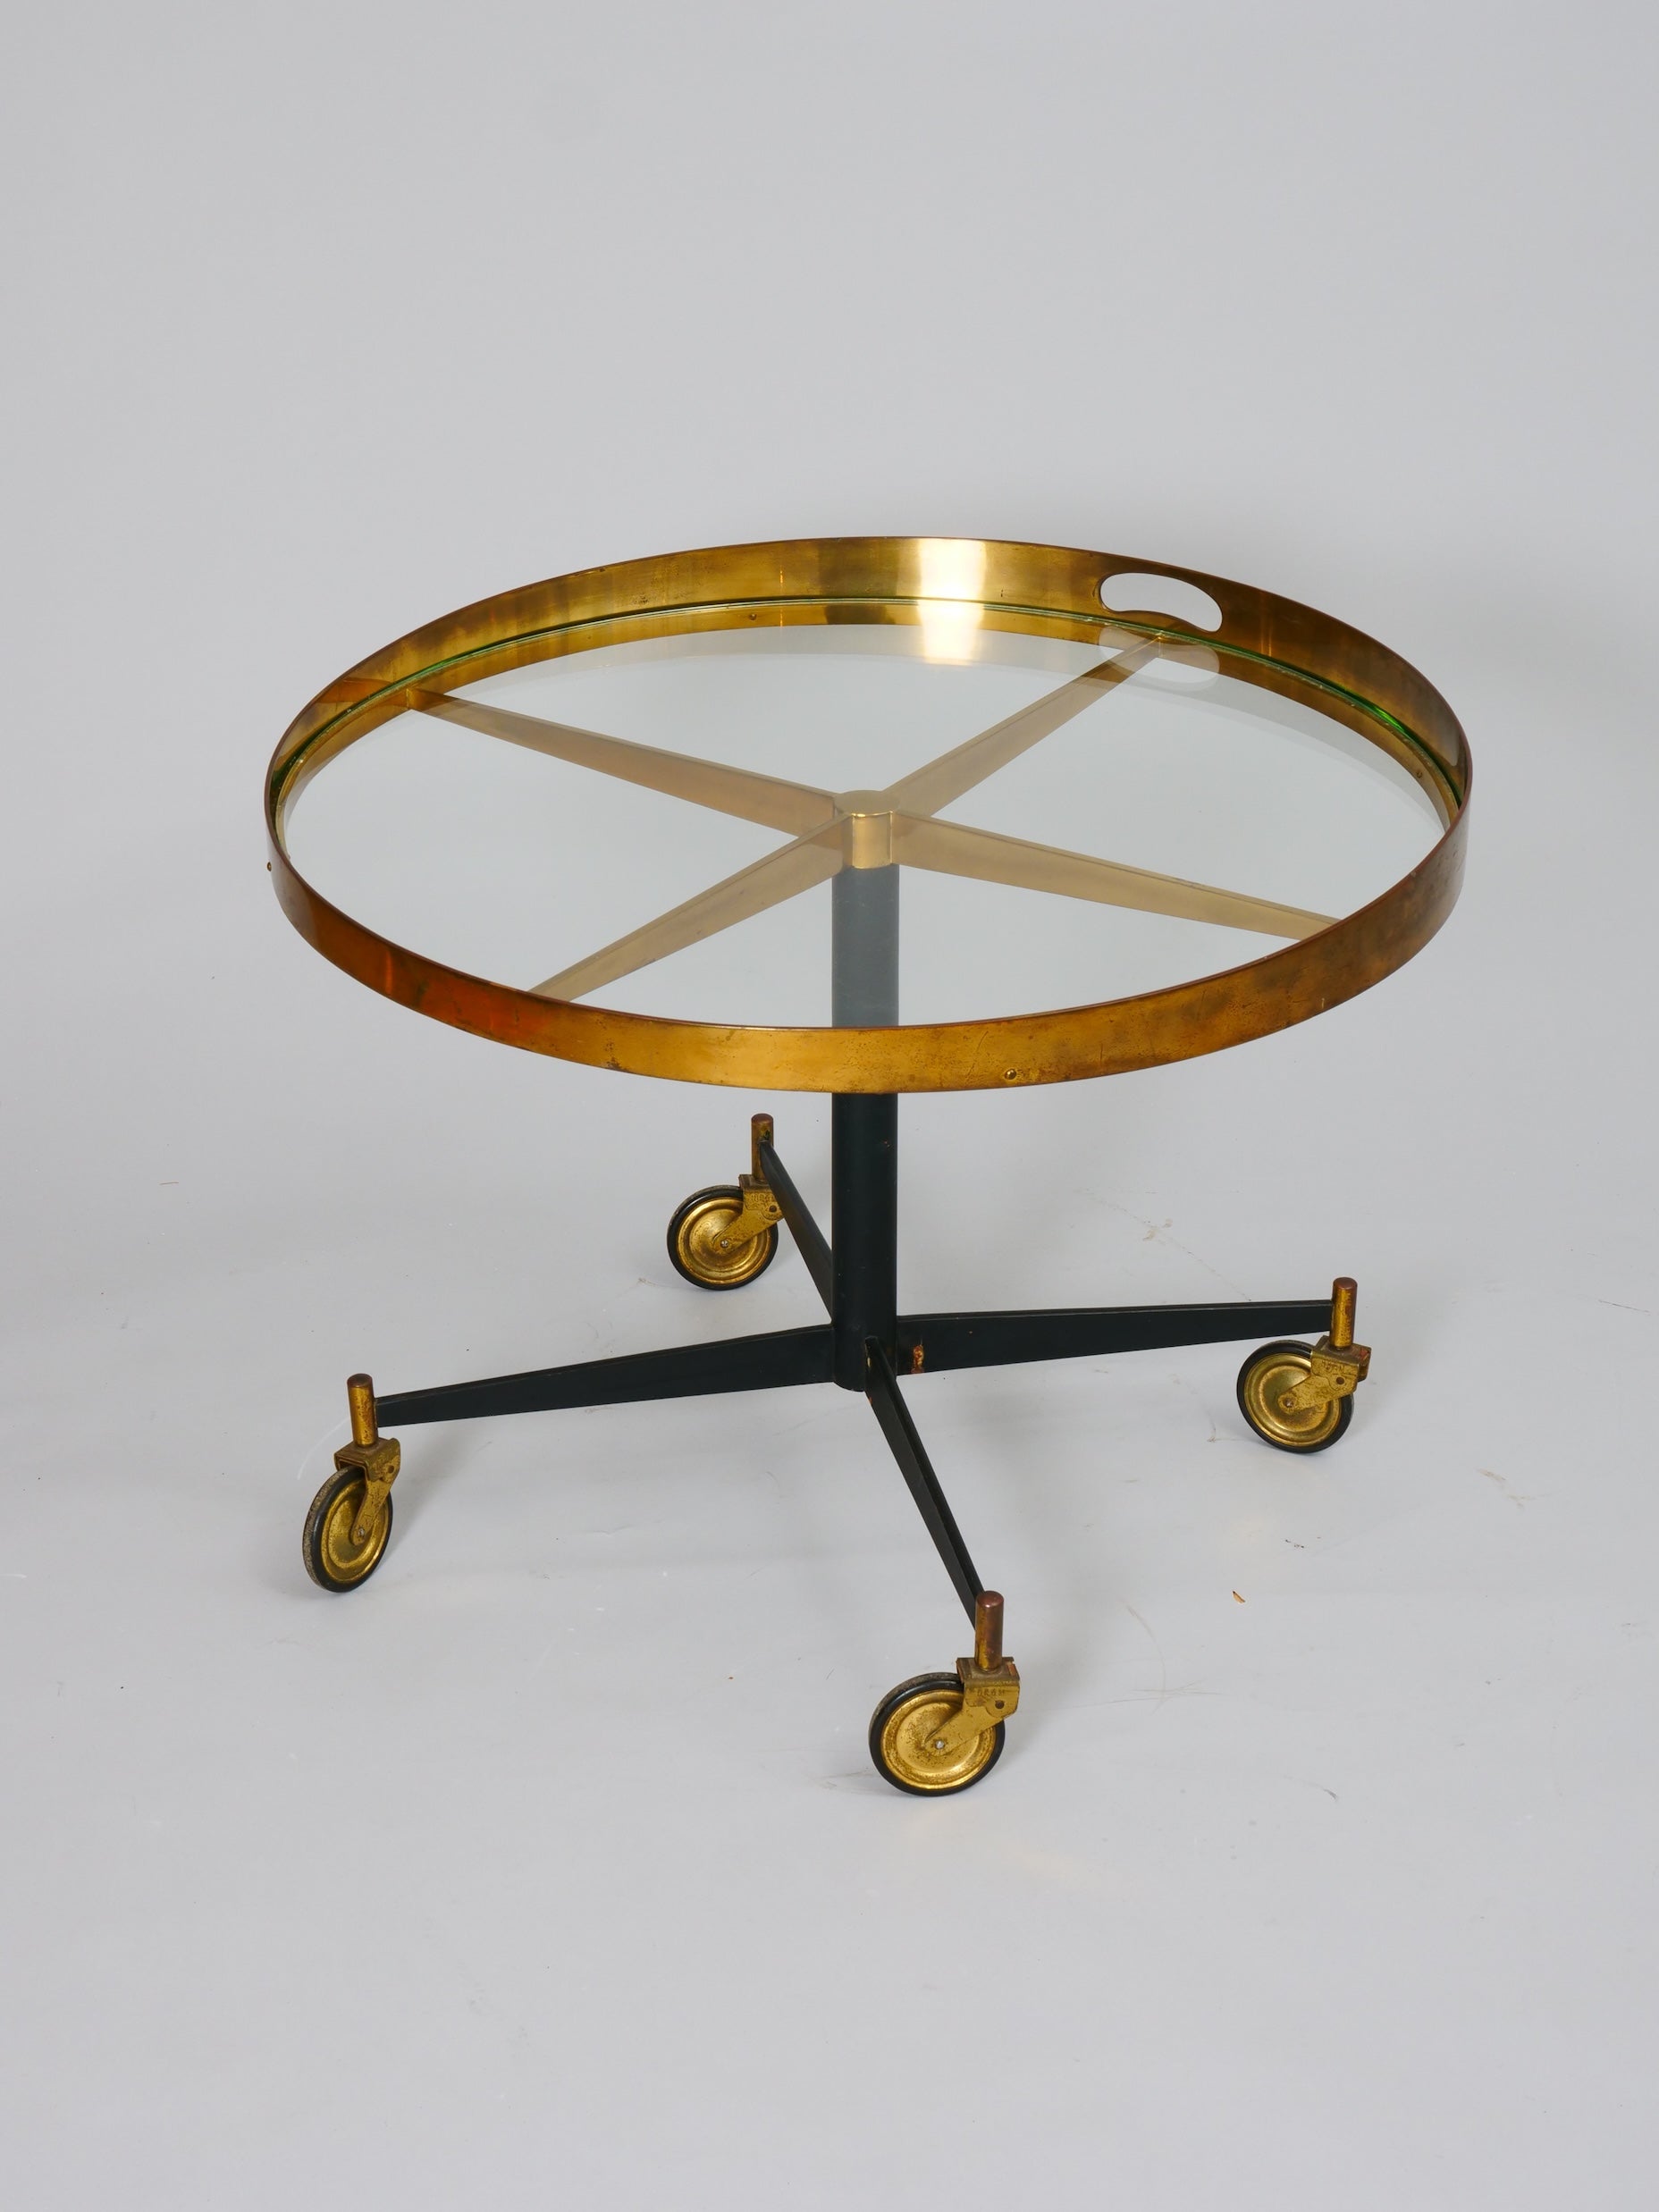 Lovely circular brass table on casters. 

Italy c1950. Lovely patina to brass. 

